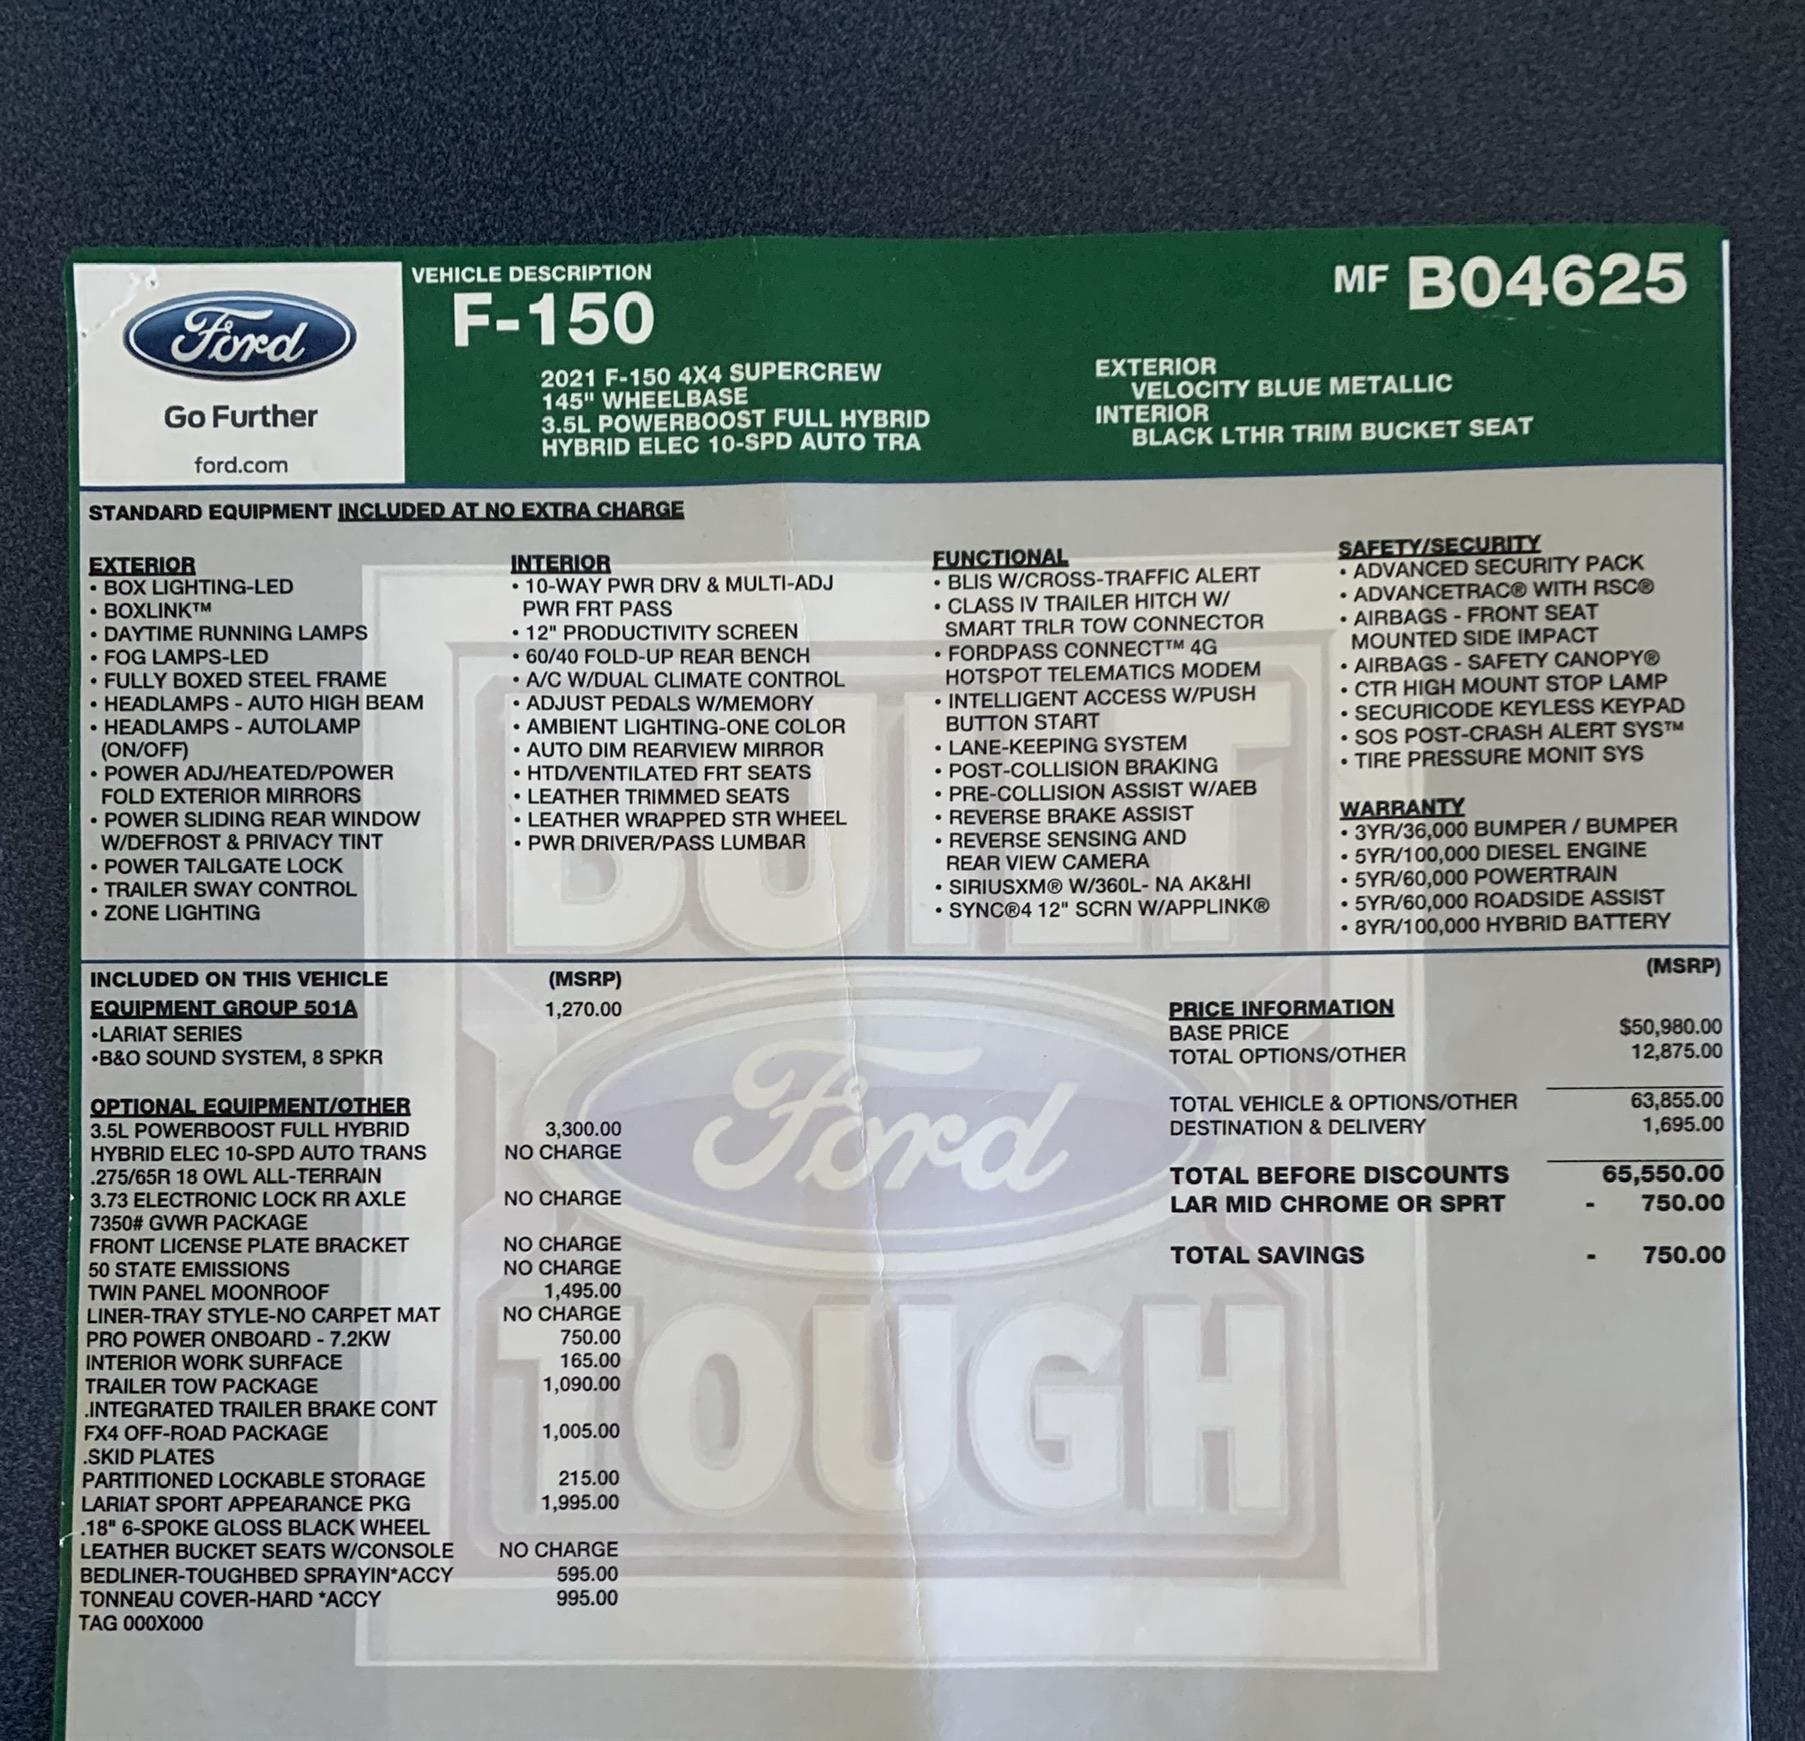 Ford F-150 Lightning 2021 F-150 Payload Stickers 8638891E-1EE9-4B56-9CF2-84D74A4EDBF5